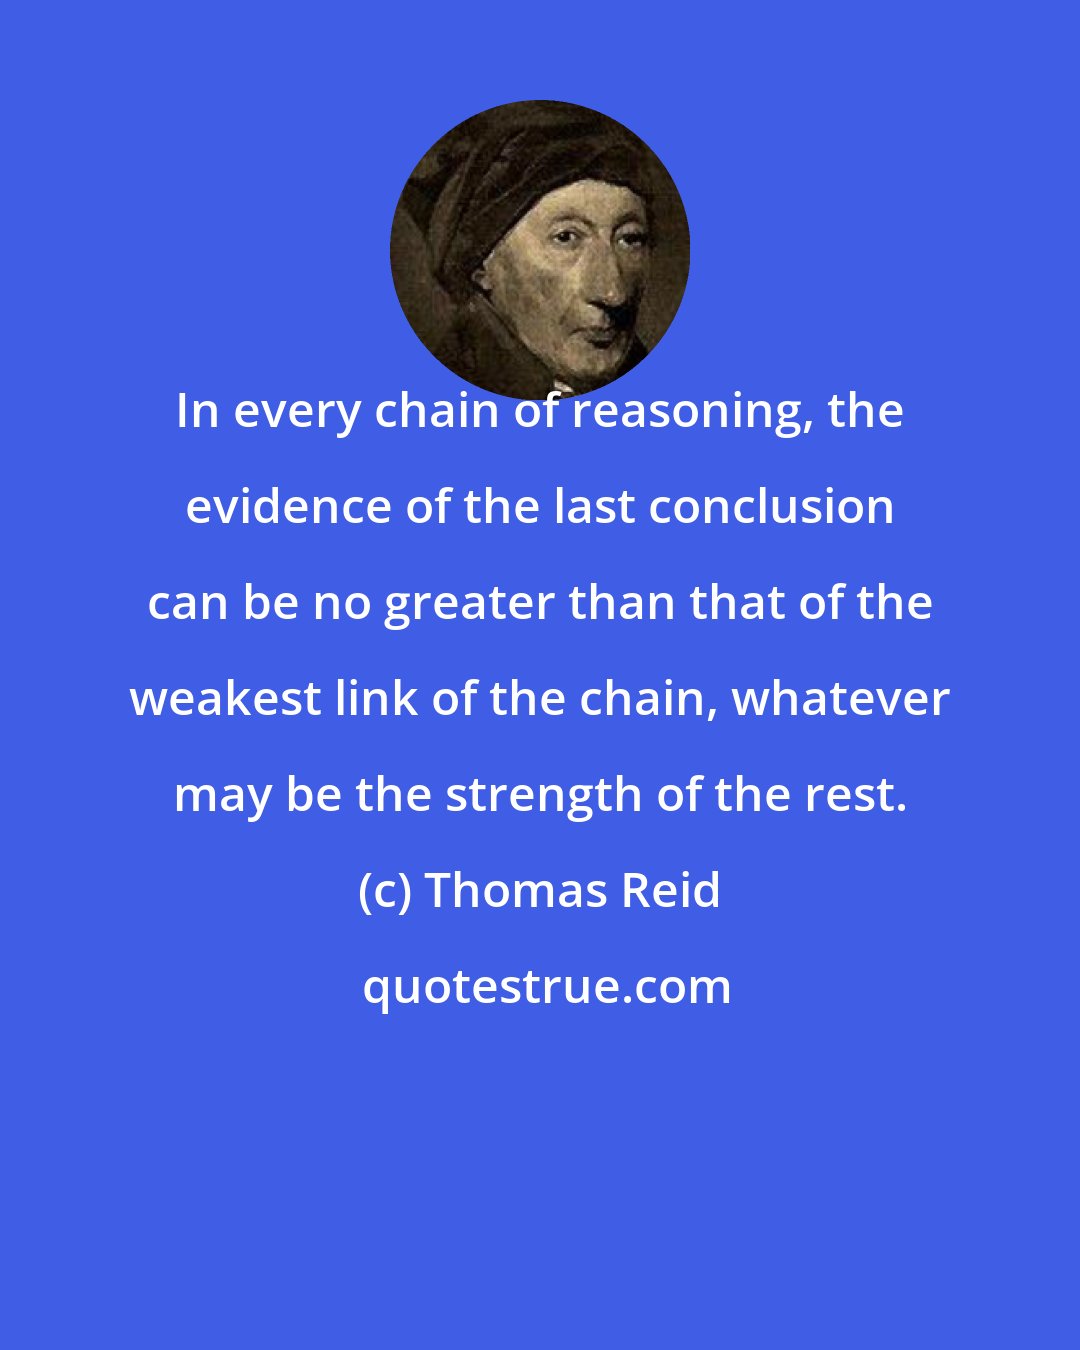 Thomas Reid: In every chain of reasoning, the evidence of the last conclusion can be no greater than that of the weakest link of the chain, whatever may be the strength of the rest.